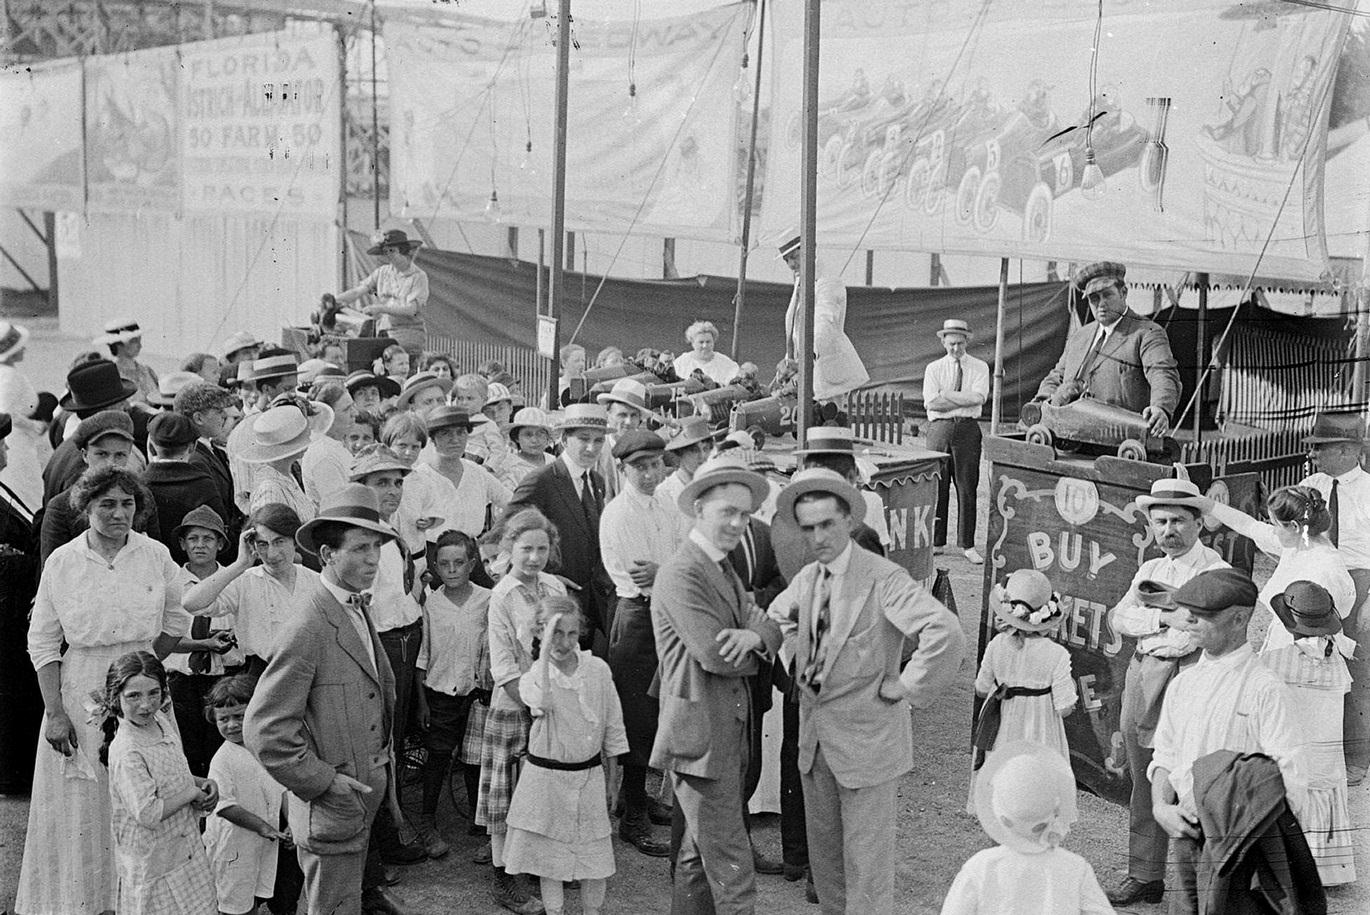 Spectators standing outside the monkey show booth at Riverview Park, Chicago, Illinois, July 16, 1916.